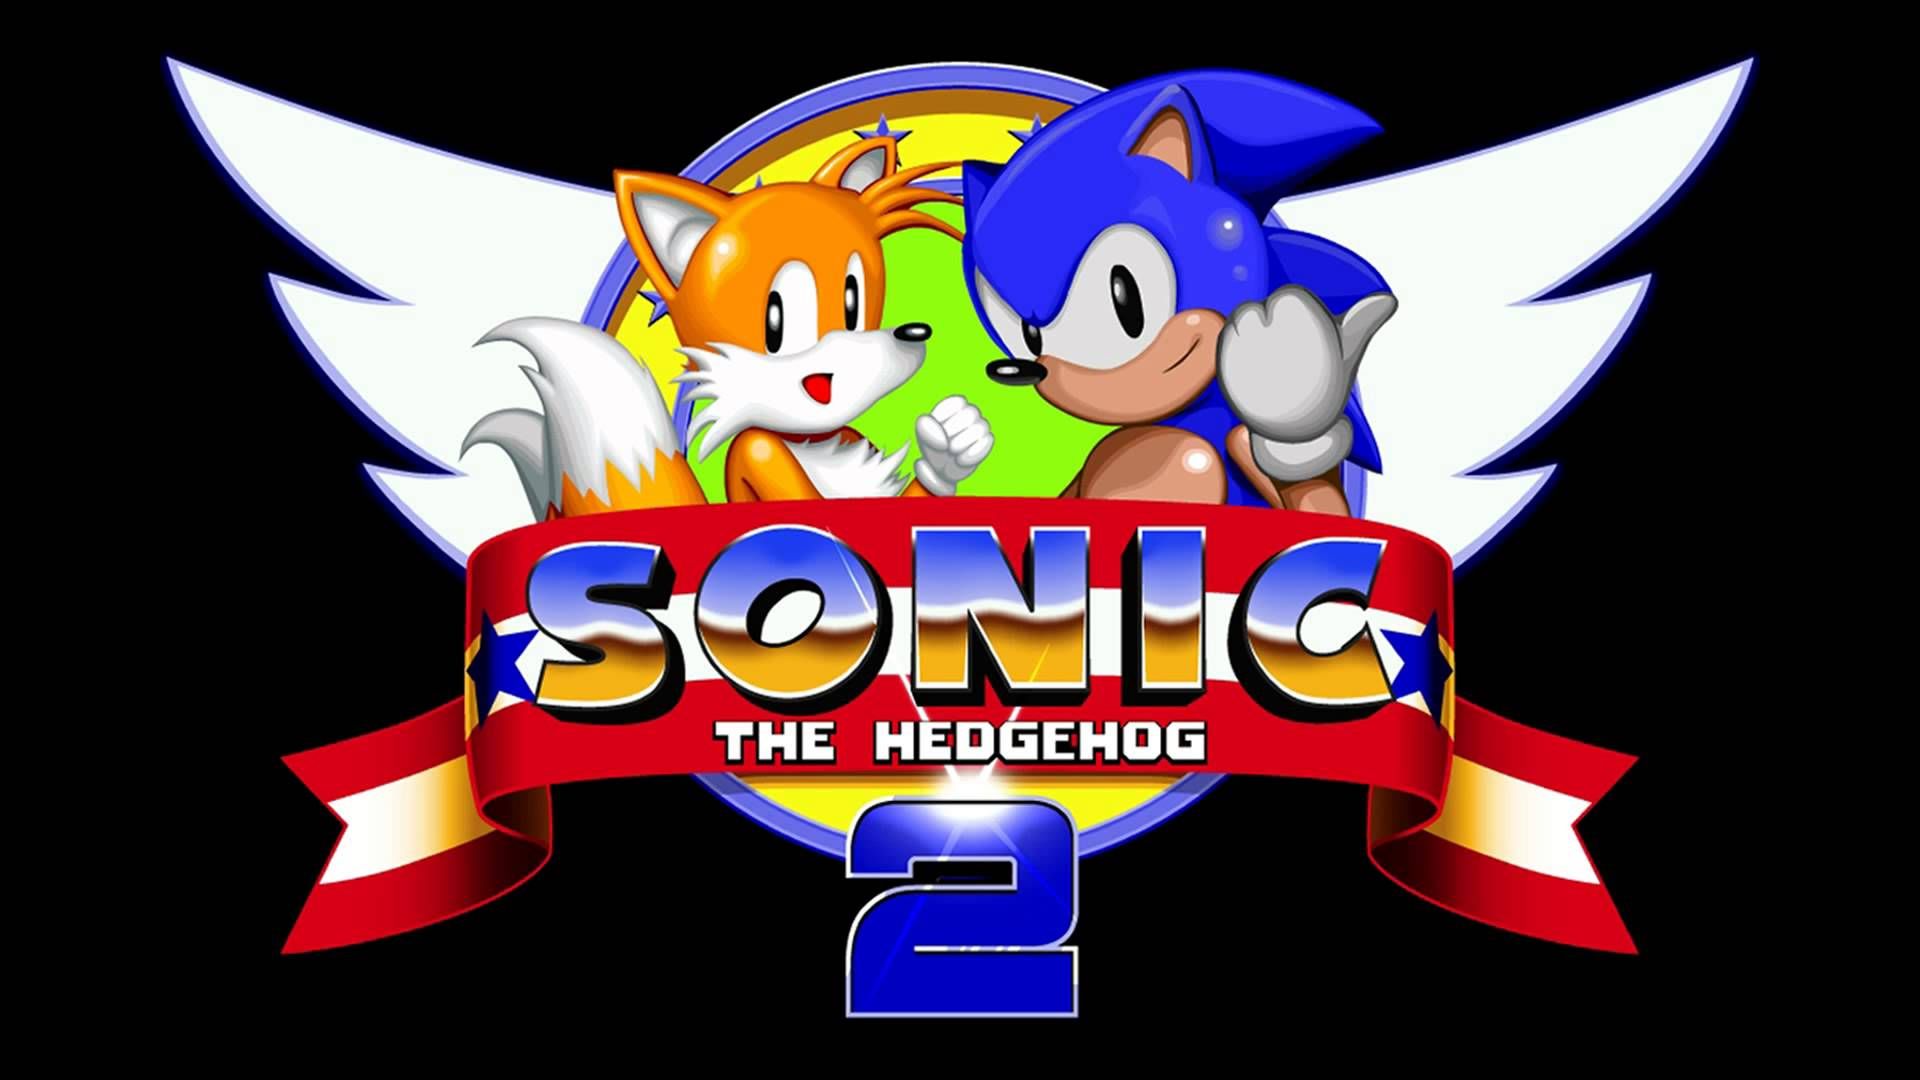 Sonic The Hedgehog 2': Everything You Wanted To Know About Its Release Date, Plot and Much More Is Right Here! Check It Out